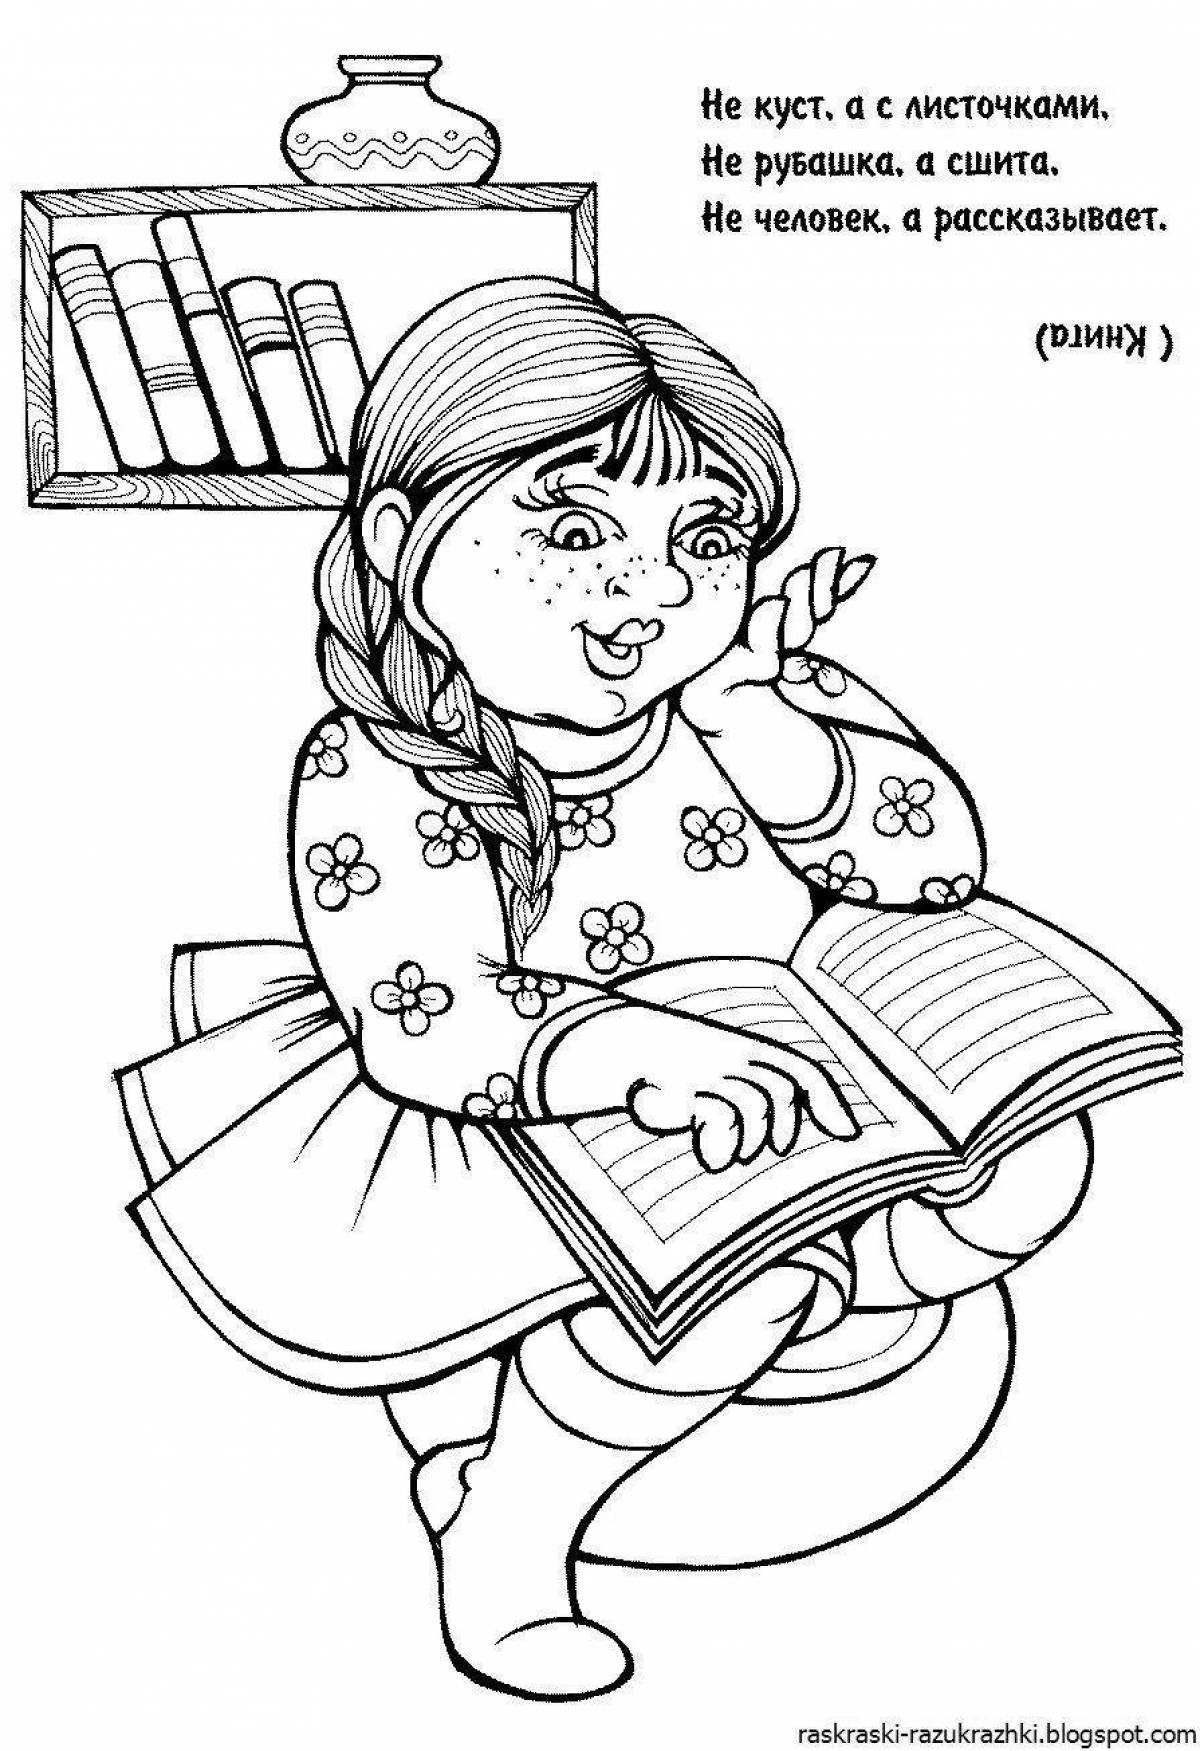 Educational coloring pages for kids